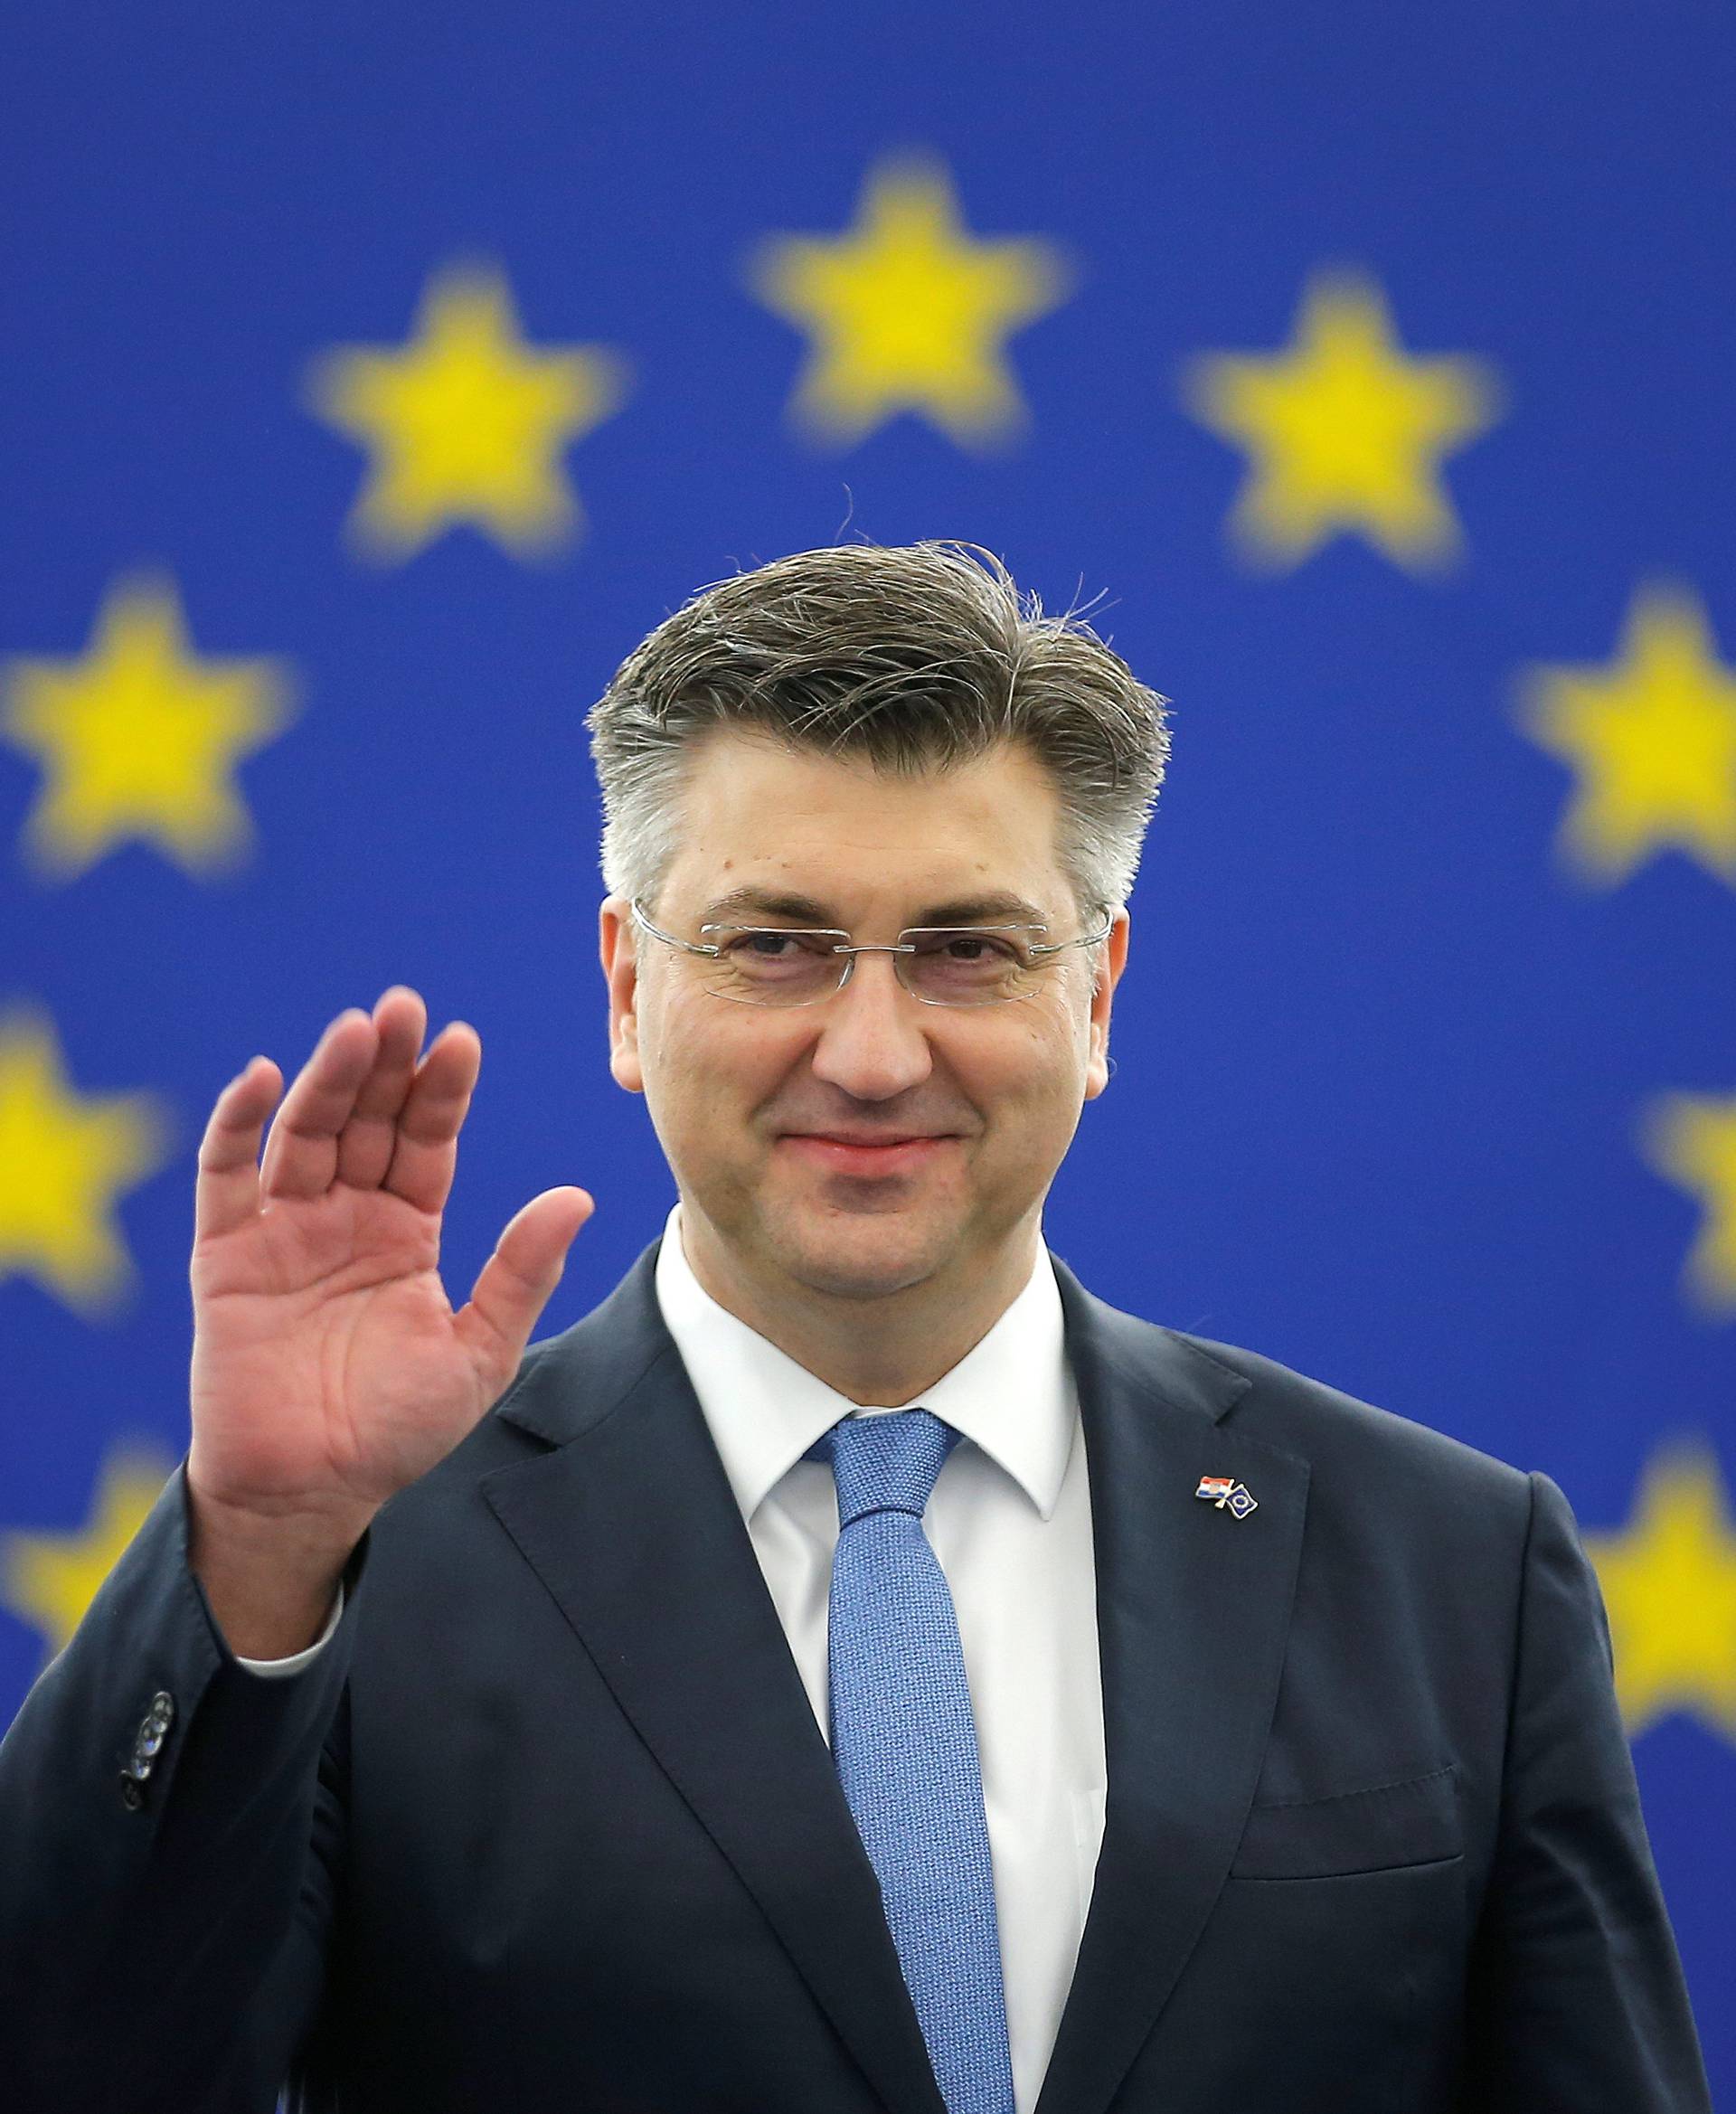 Croatia's Prime Minister Plenkovic arrives to deliver a speech during a debate on the Future of Europe at the European Parliament in Strasbourg